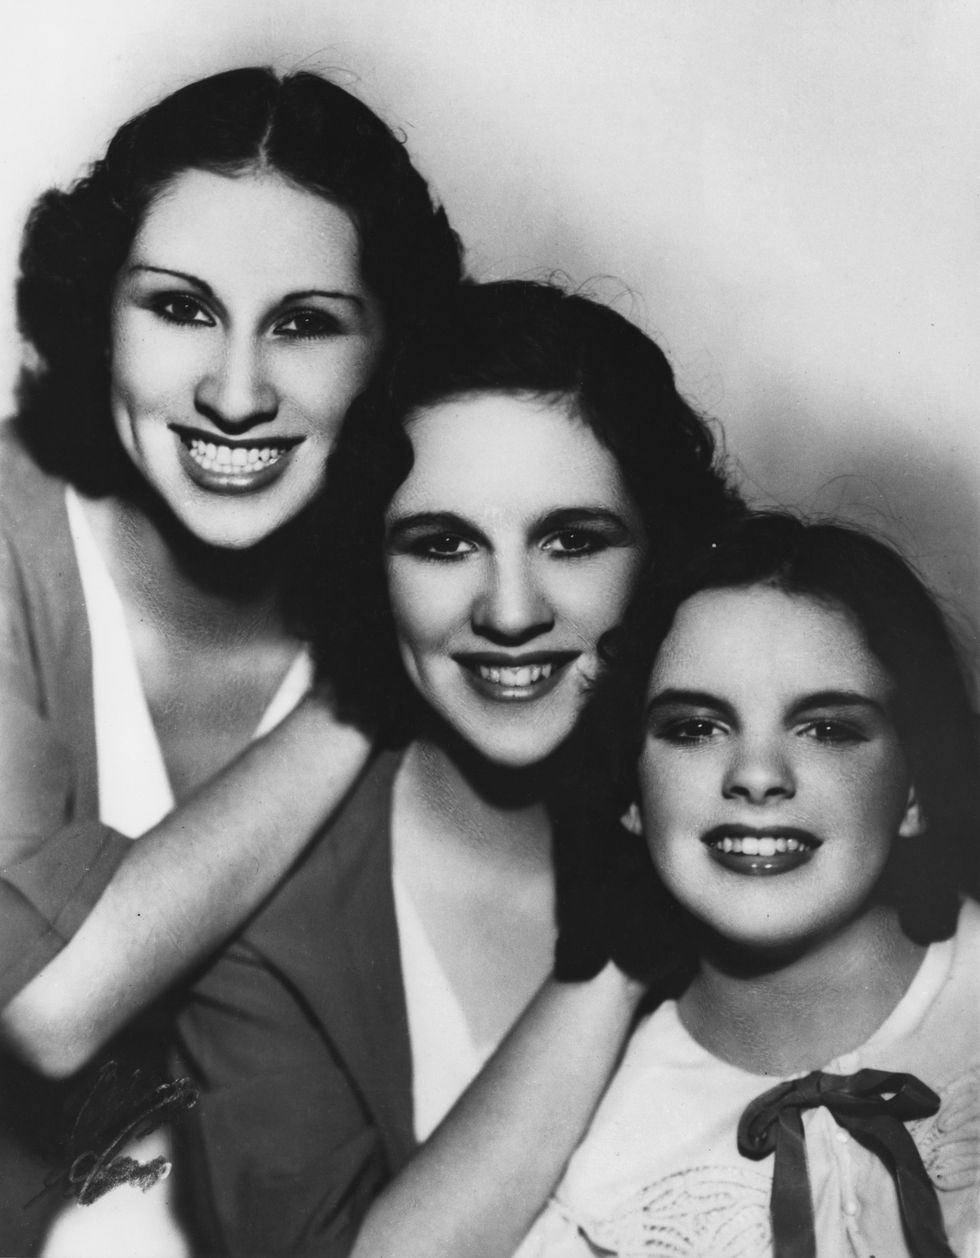 american actress and singer judy garland 1922   1969 with her sisters in a promotional portrait for their musical trio the gumm sisters, circa 1935 from left to right, mary jane gumm, aka suzy or suzanne 1915   1964, dorothy virginia gumm, aka jimmie 1917   1977 and frances ethel gumm later judy garland  photo by pictorial paradearchive photosgetty images